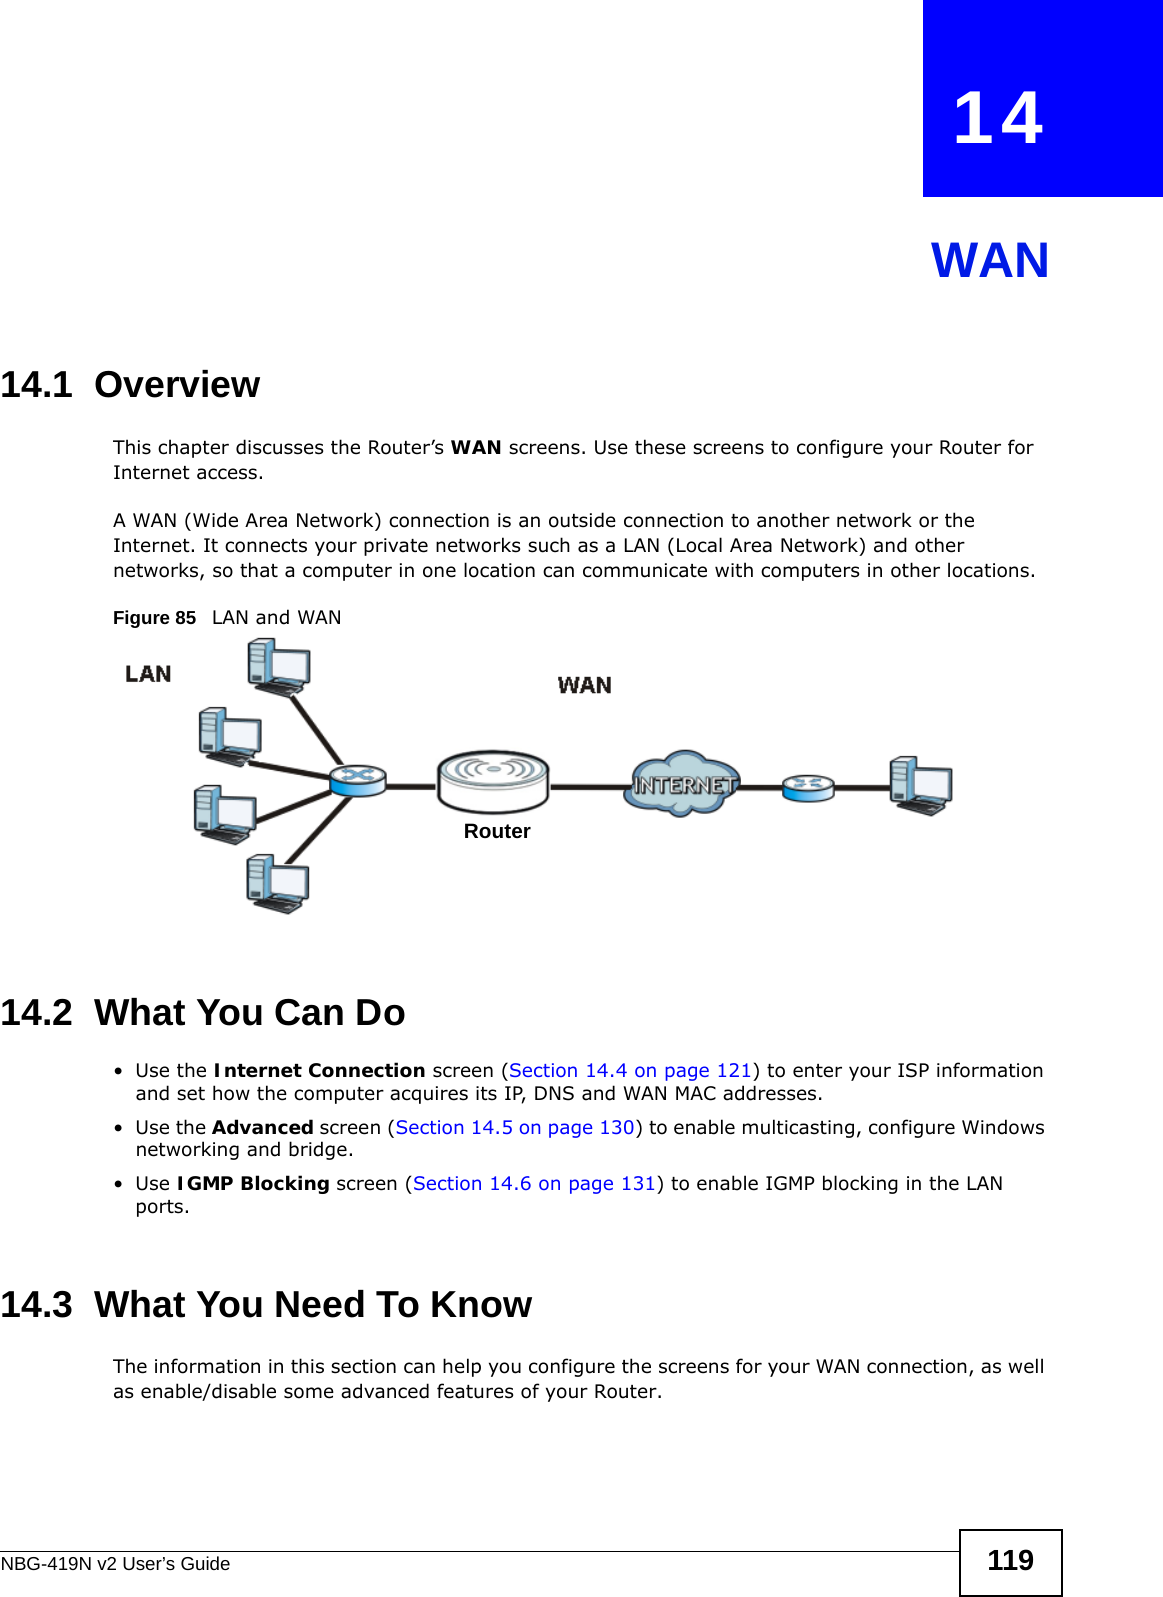 NBG-419N v2 User’s Guide 119CHAPTER   14WAN14.1  OverviewThis chapter discusses the Router’s WAN screens. Use these screens to configure your Router for Internet access.A WAN (Wide Area Network) connection is an outside connection to another network or the Internet. It connects your private networks such as a LAN (Local Area Network) and other networks, so that a computer in one location can communicate with computers in other locations.Figure 85   LAN and WAN14.2  What You Can Do•Use the Internet Connection screen (Section 14.4 on page 121) to enter your ISP information and set how the computer acquires its IP, DNS and WAN MAC addresses.•Use the Advanced screen (Section 14.5 on page 130) to enable multicasting, configure Windows networking and bridge.•Use IGMP Blocking screen (Section 14.6 on page 131) to enable IGMP blocking in the LAN ports.14.3  What You Need To KnowThe information in this section can help you configure the screens for your WAN connection, as well as enable/disable some advanced features of your Router.Router